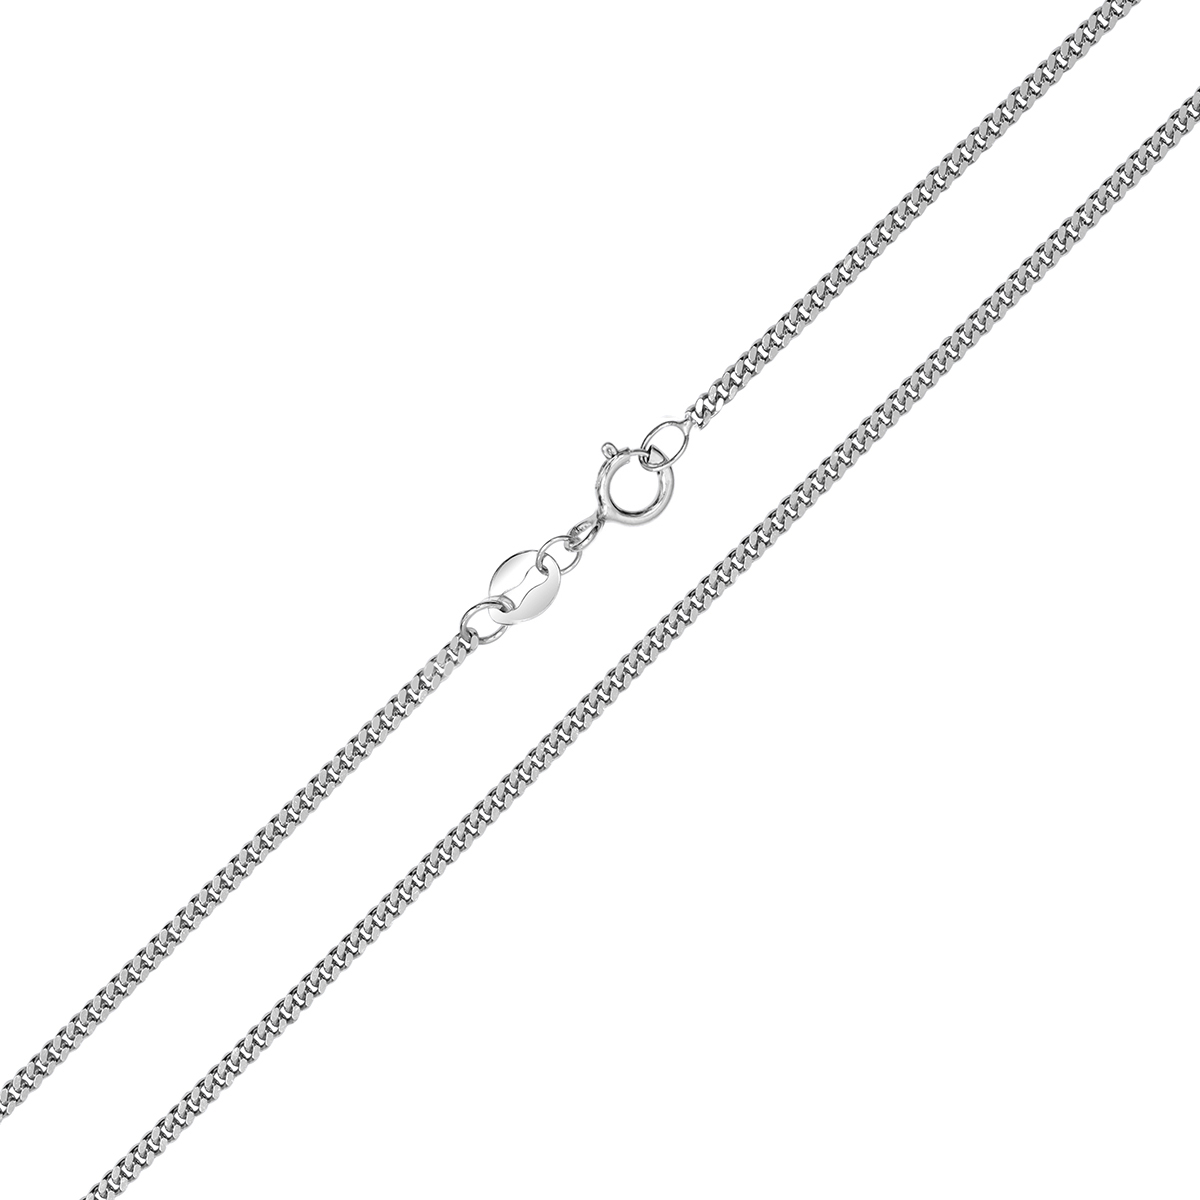 10K White Gold 1.5mm Diamond Cut Gormette Chain with Spring Ring Clasp - 22 Inch